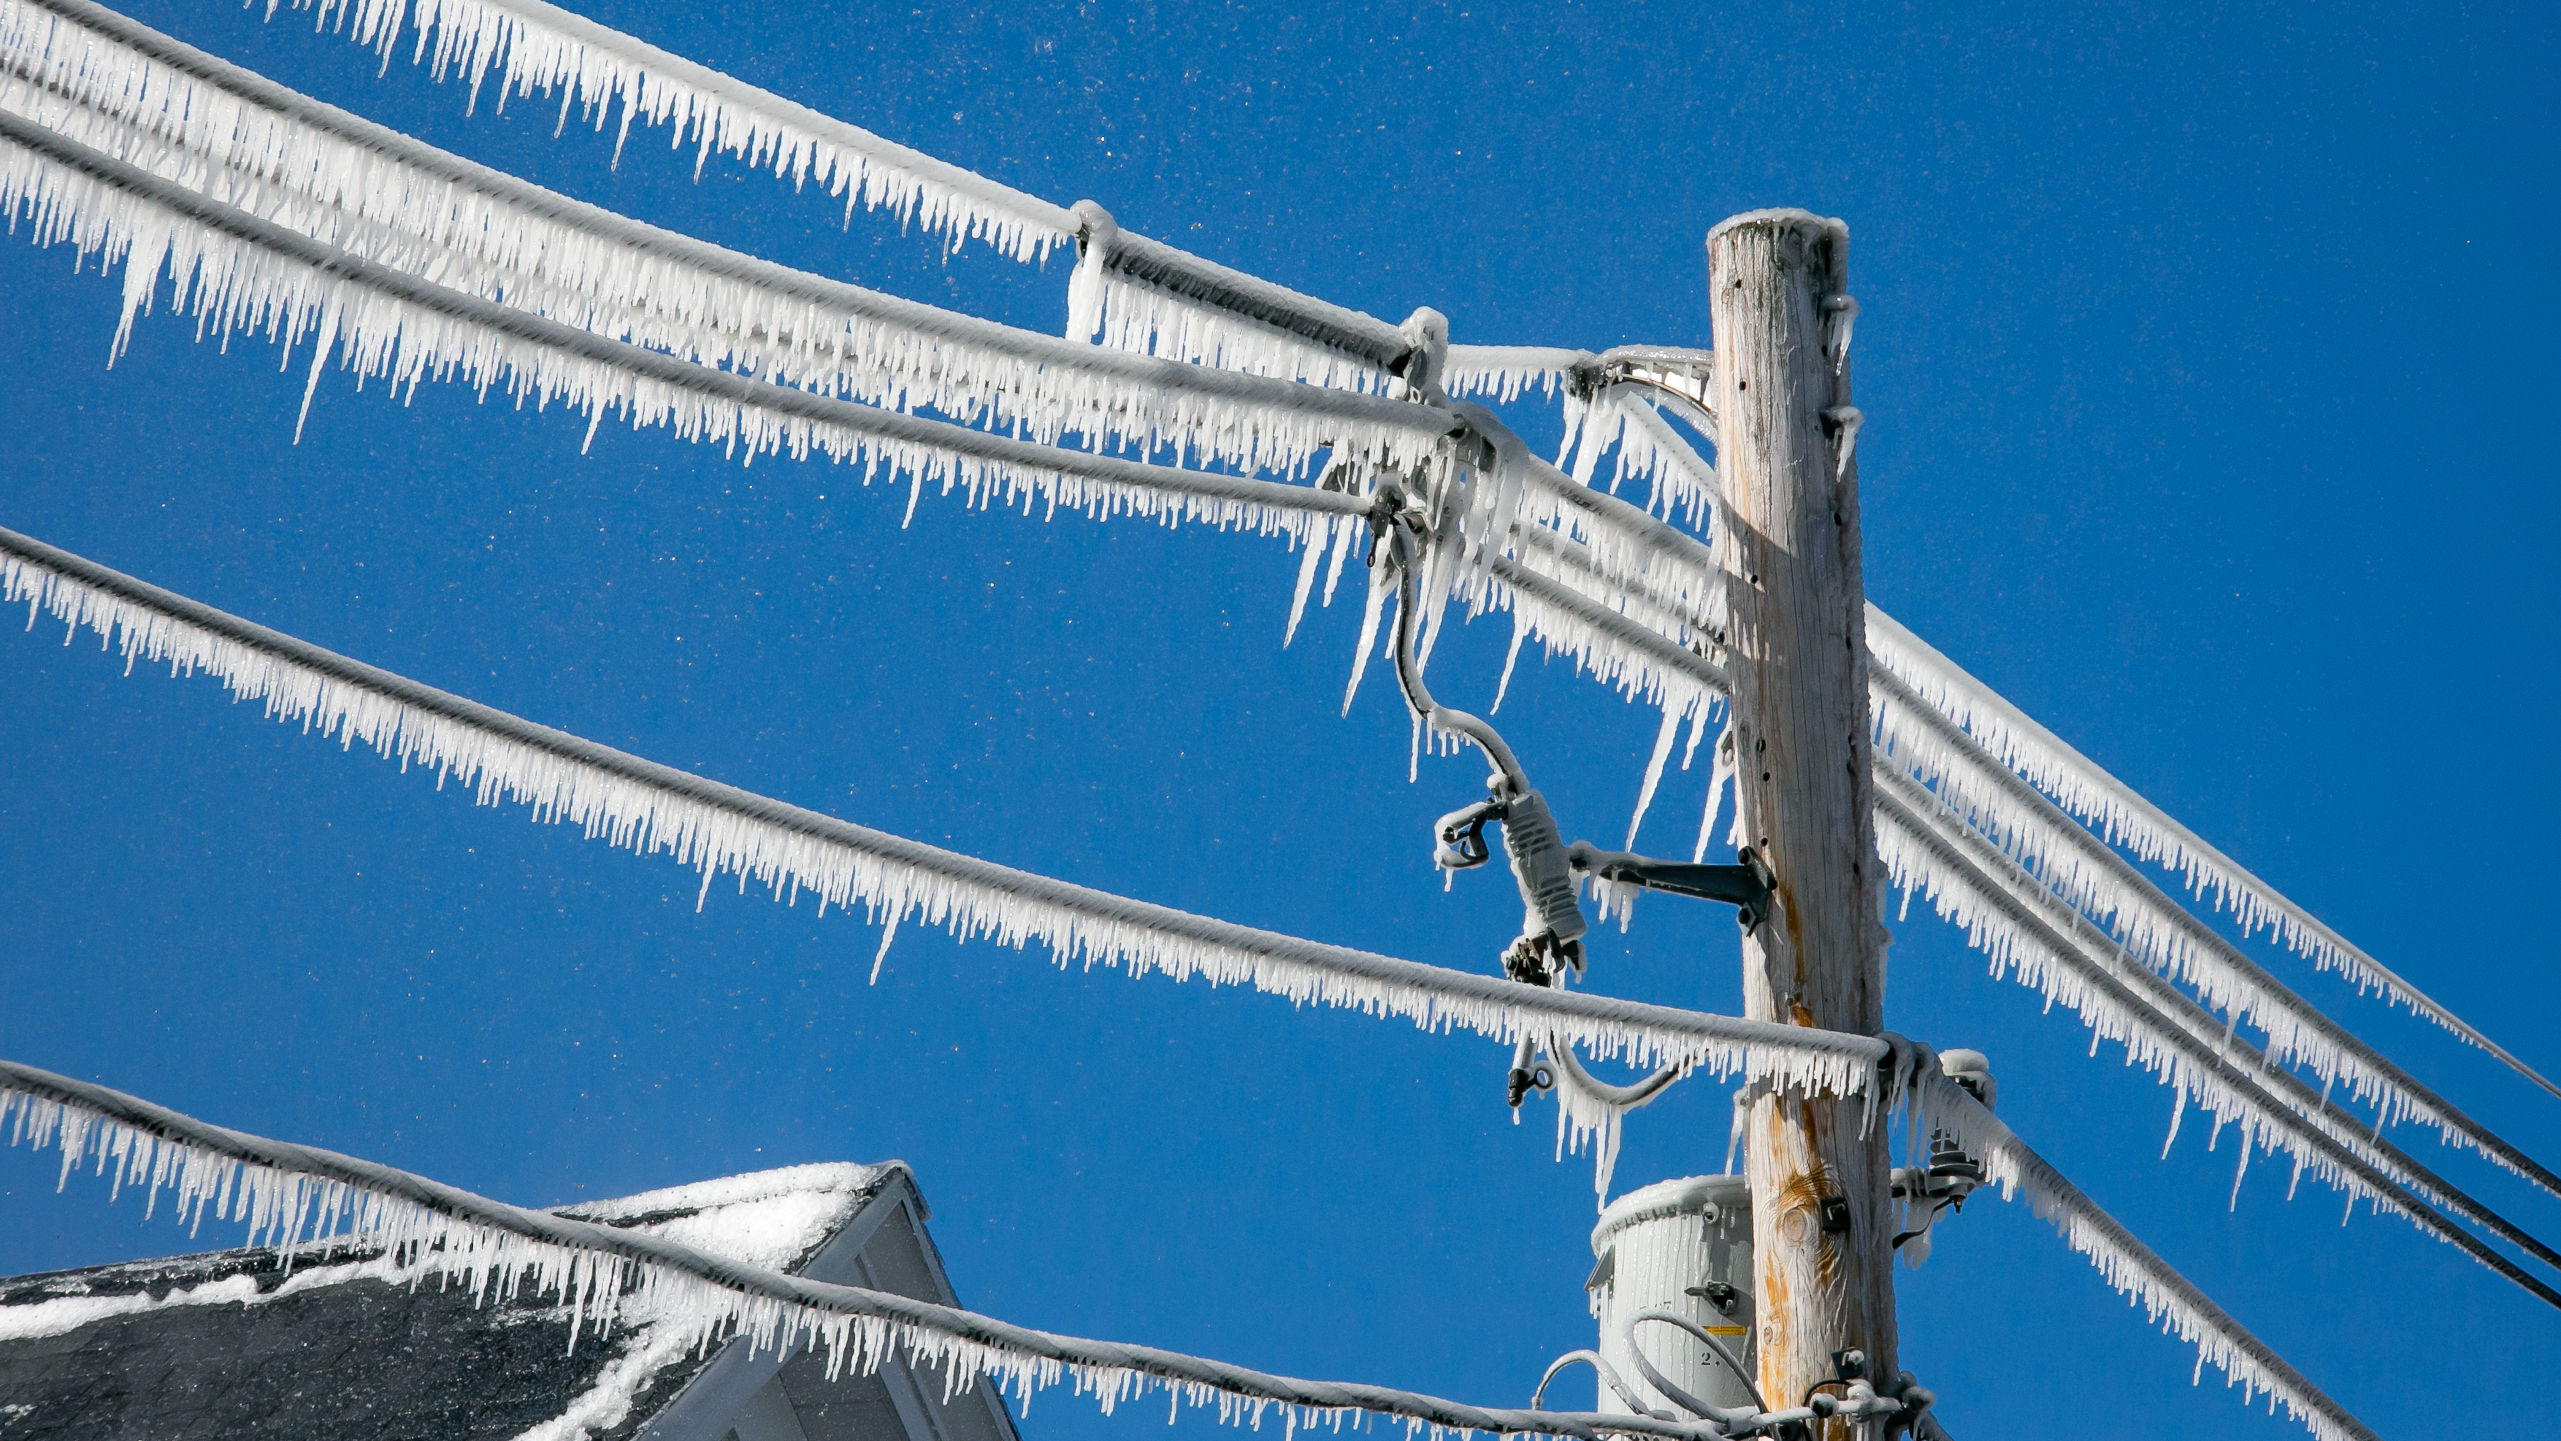 https://firstonsite.com/wp-content/uploads/powerlines-that-cause-blackouts-and-power-outages-during-winter.jpg